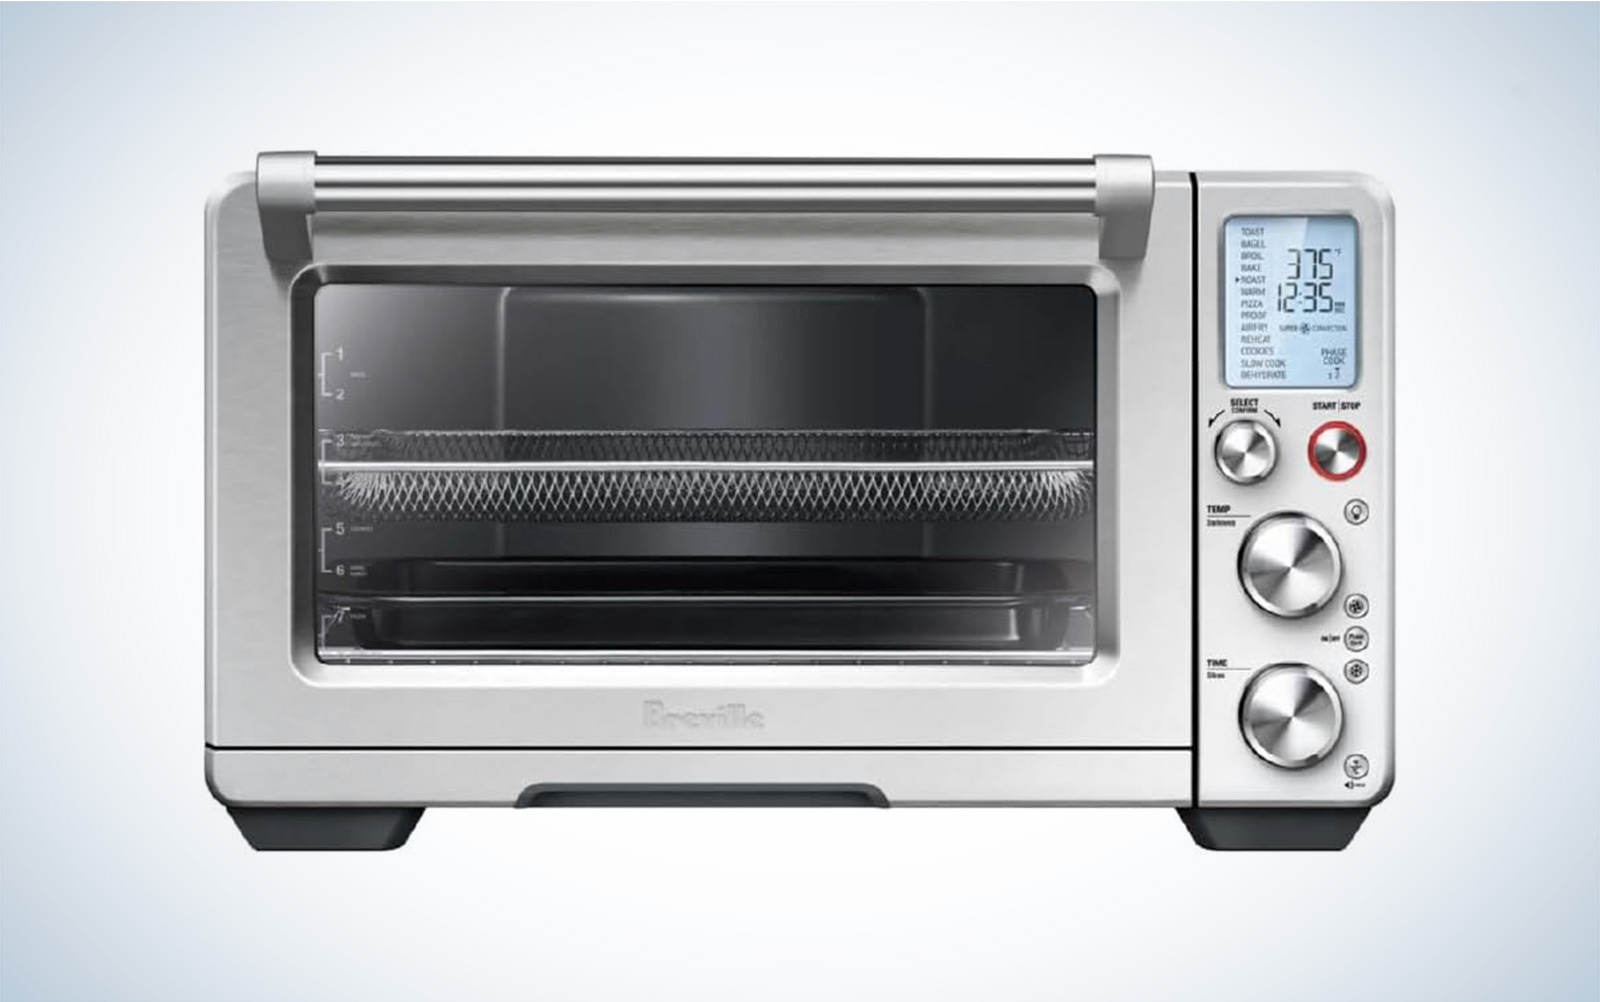 The Best Black Friday Air Fryer Toaster Oven Deals on Brands Like